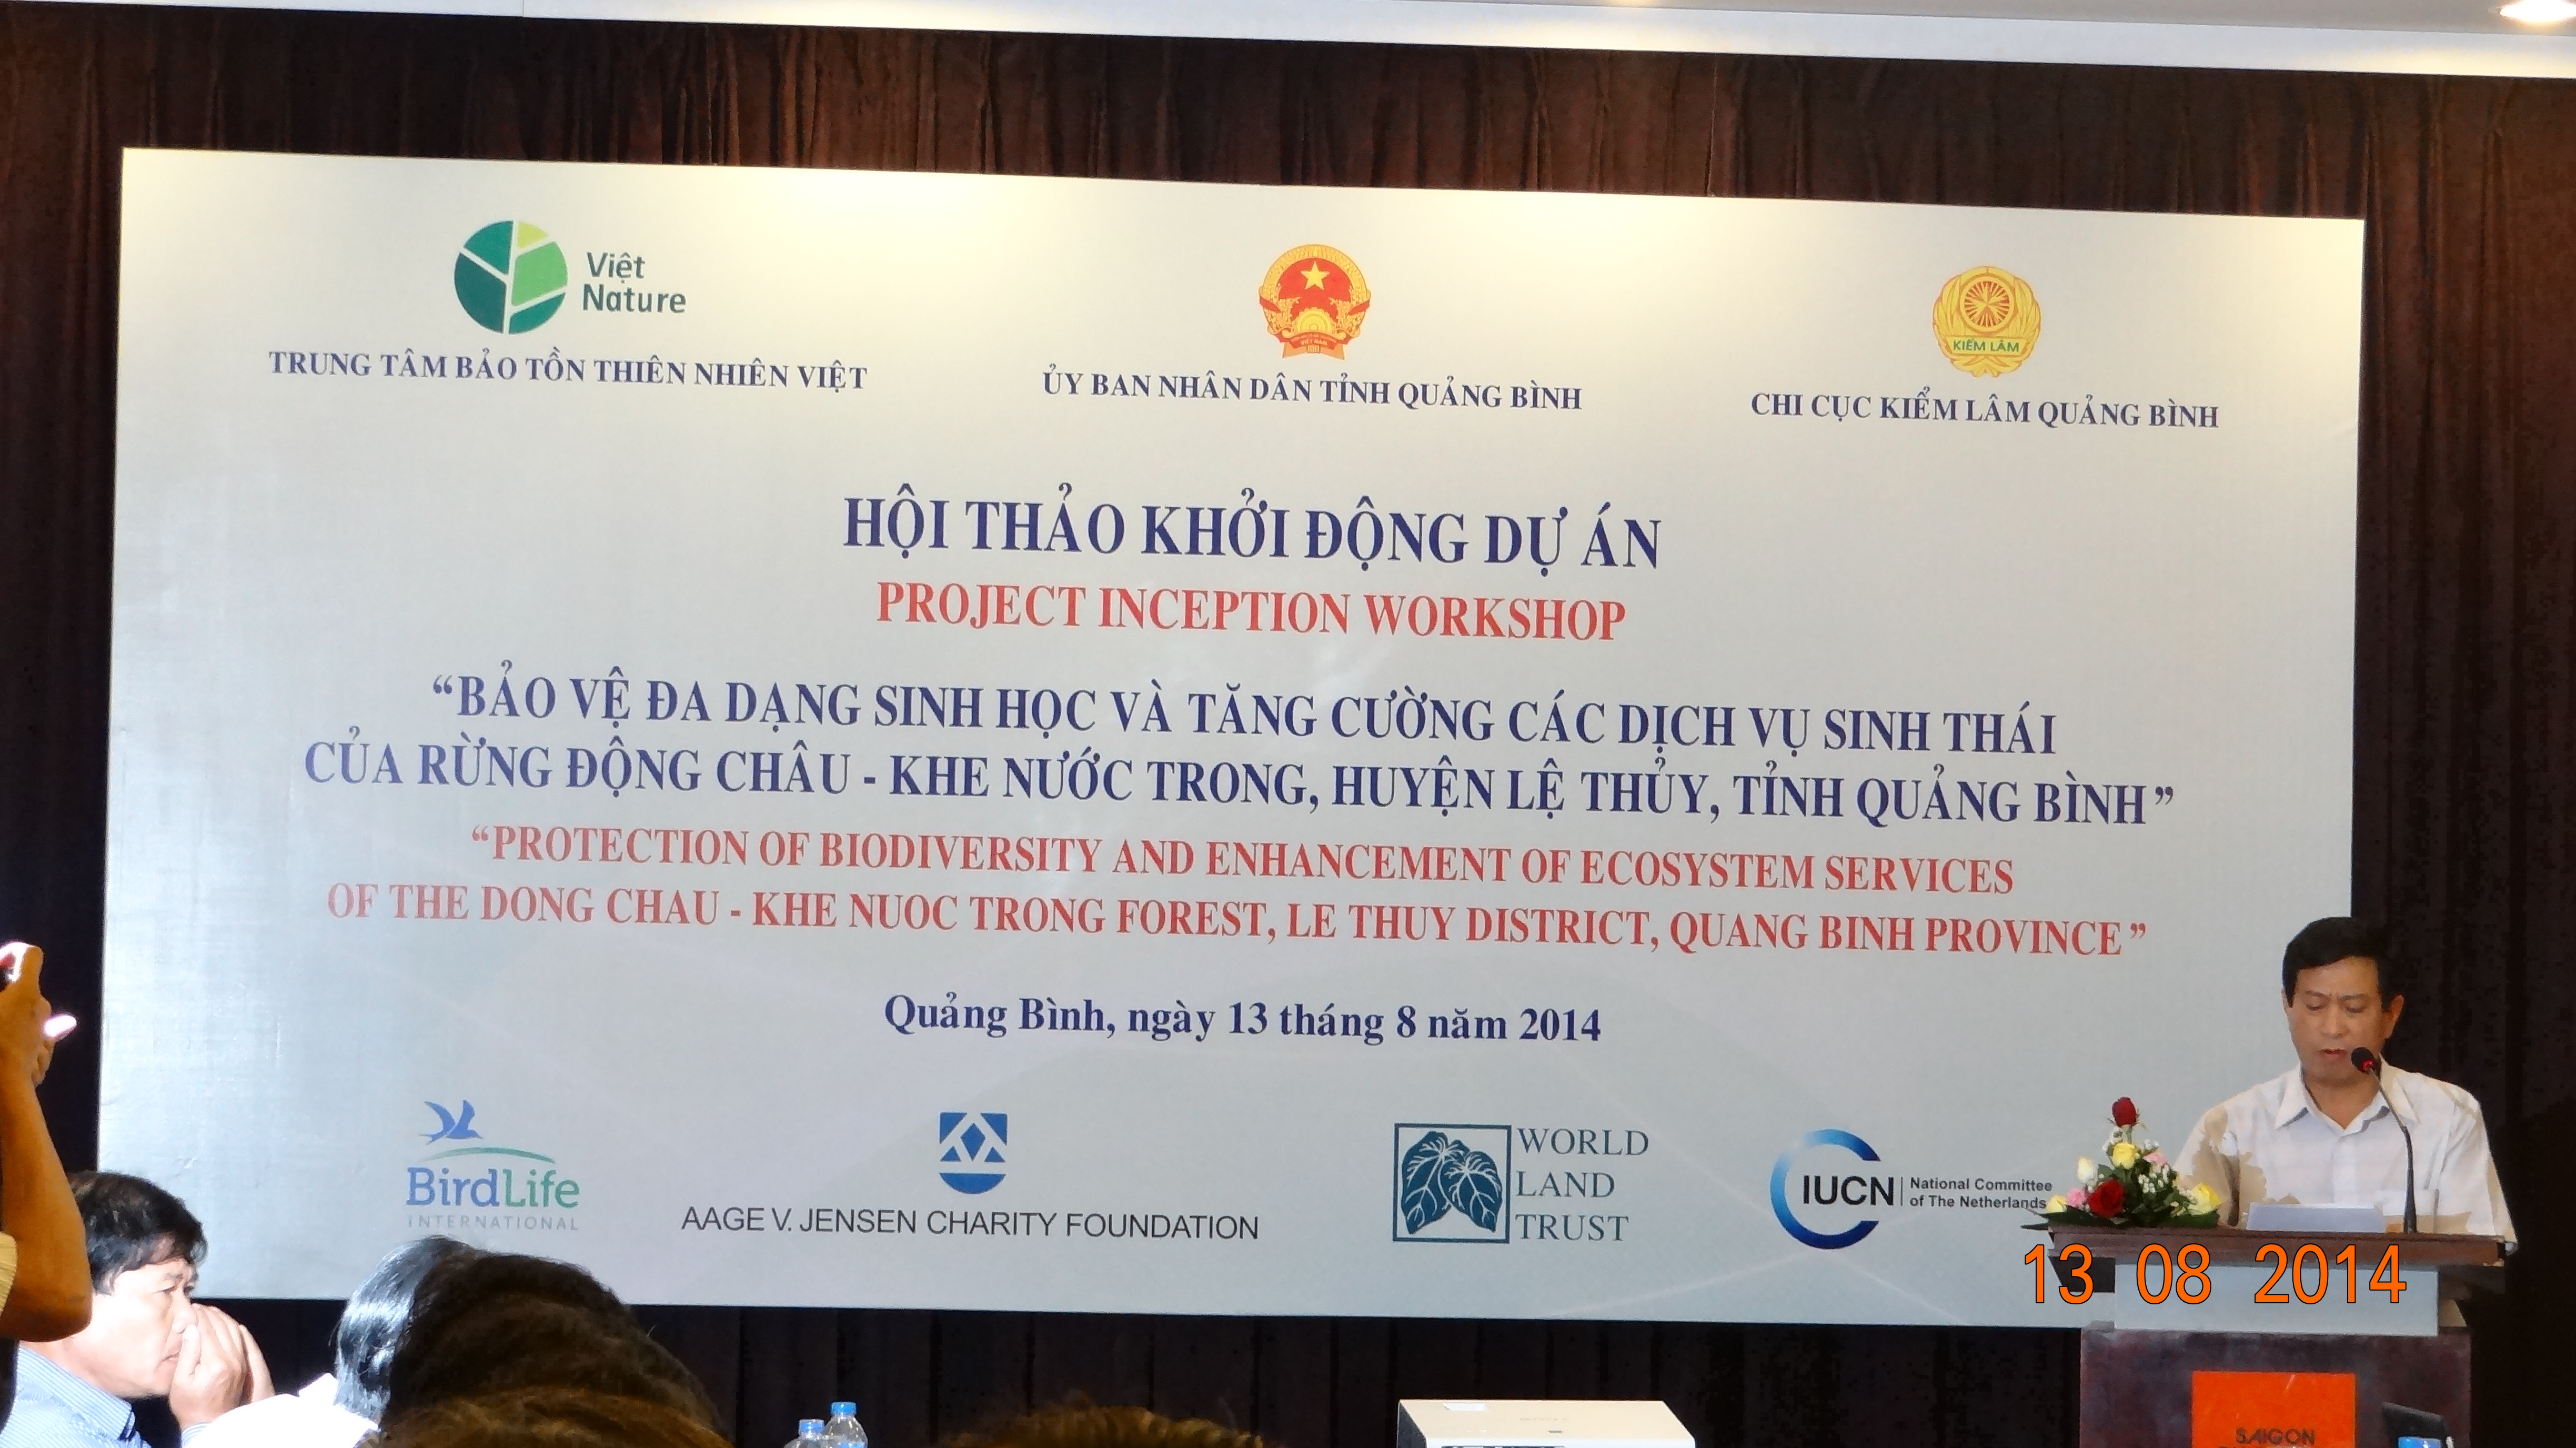 Lauch of “Protection of biodiversity and enhancement of ecosystem services of the Dong Chau – Khe Nuoc Trong Forest, Le Thuy District, Quang Binh Province” project